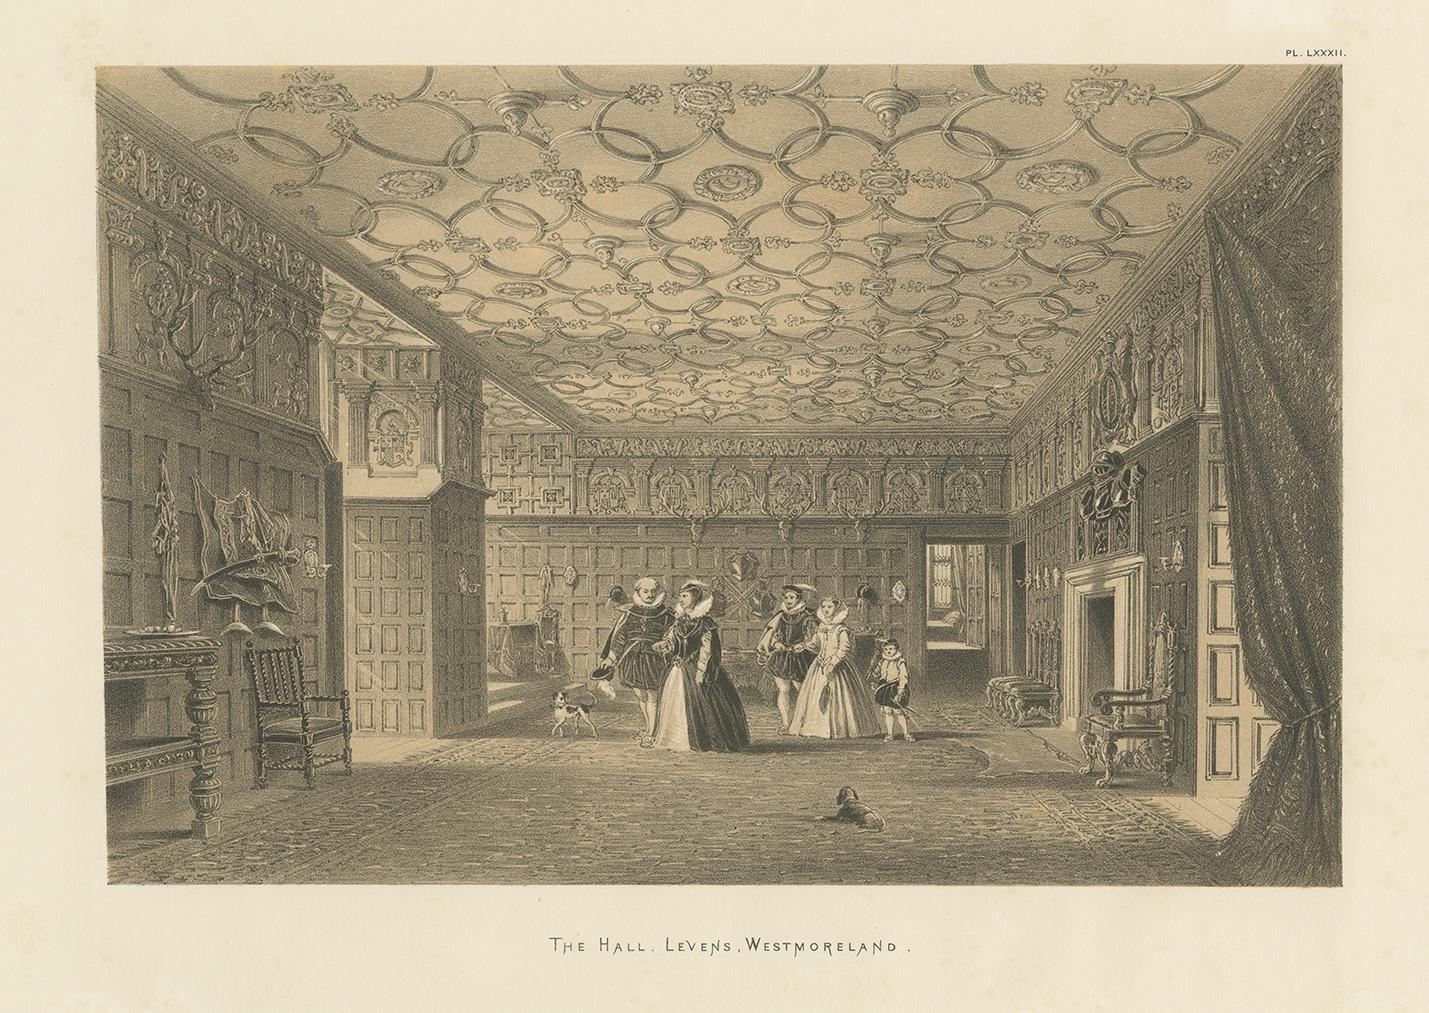 Antique print titled 'The Hall. Levens. Westmoreland'. Lithograph of the hall of Levens Hall. Levens Hall is a manor house in the Kent valley, near the village of Levens and 5 miles (9 km) south of Kendal in Cumbria, Northern England. This print